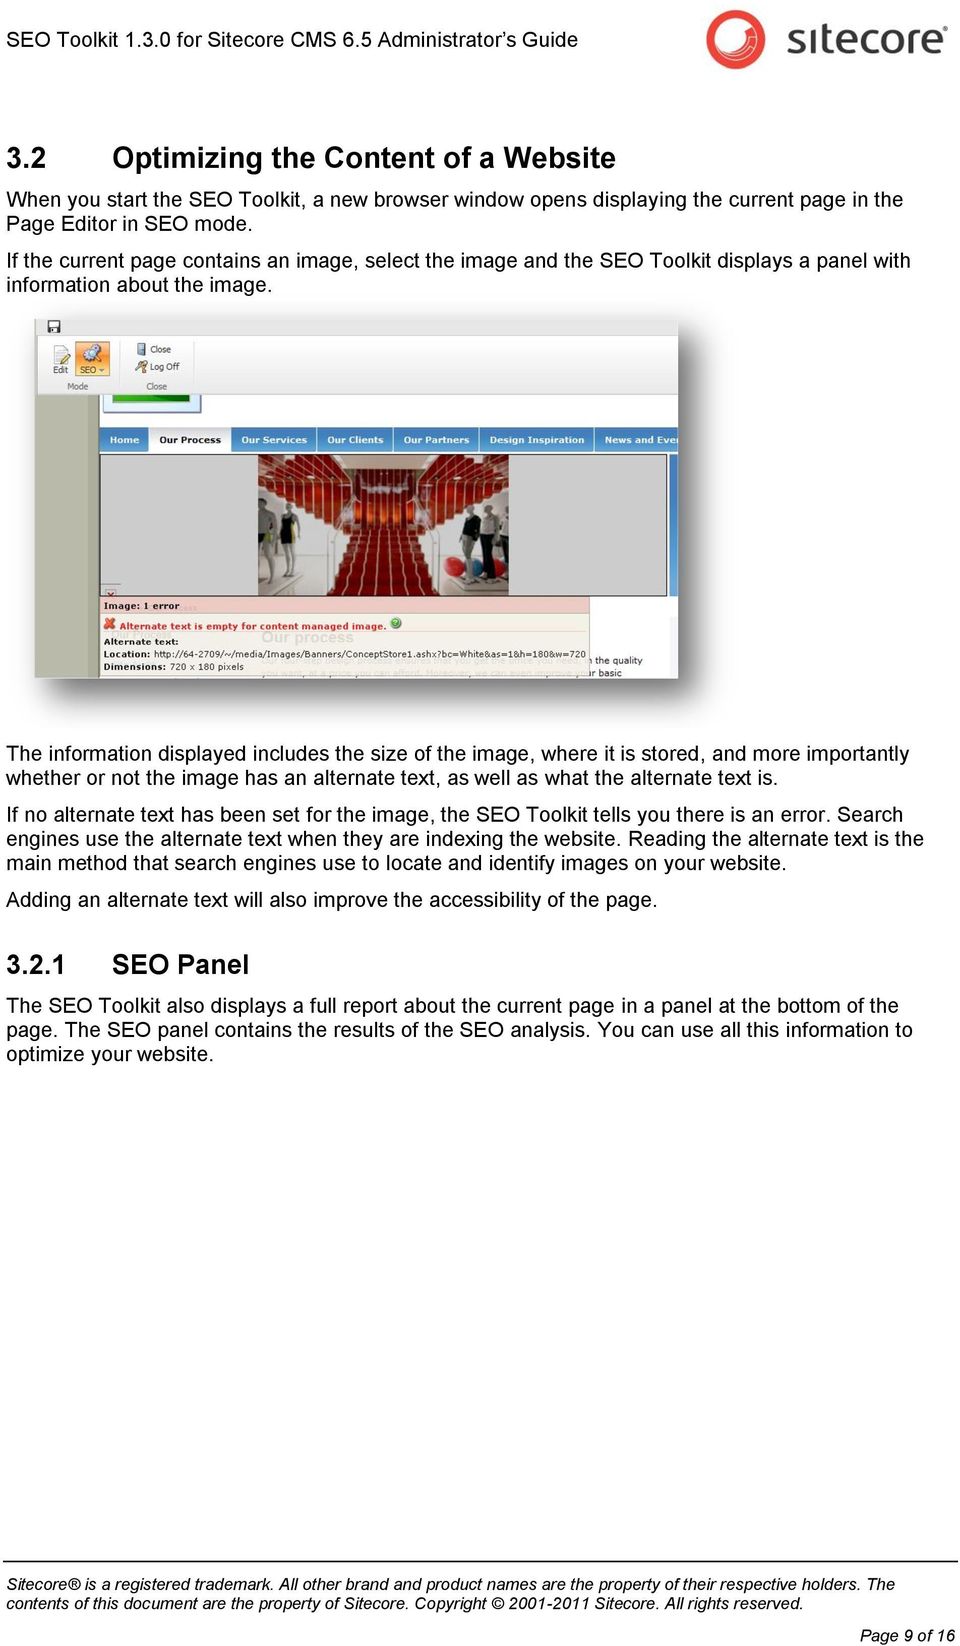 The information displayed includes the size of the image, where it is stored, and more importantly whether or not the image has an alternate text, as well as what the alternate text is.